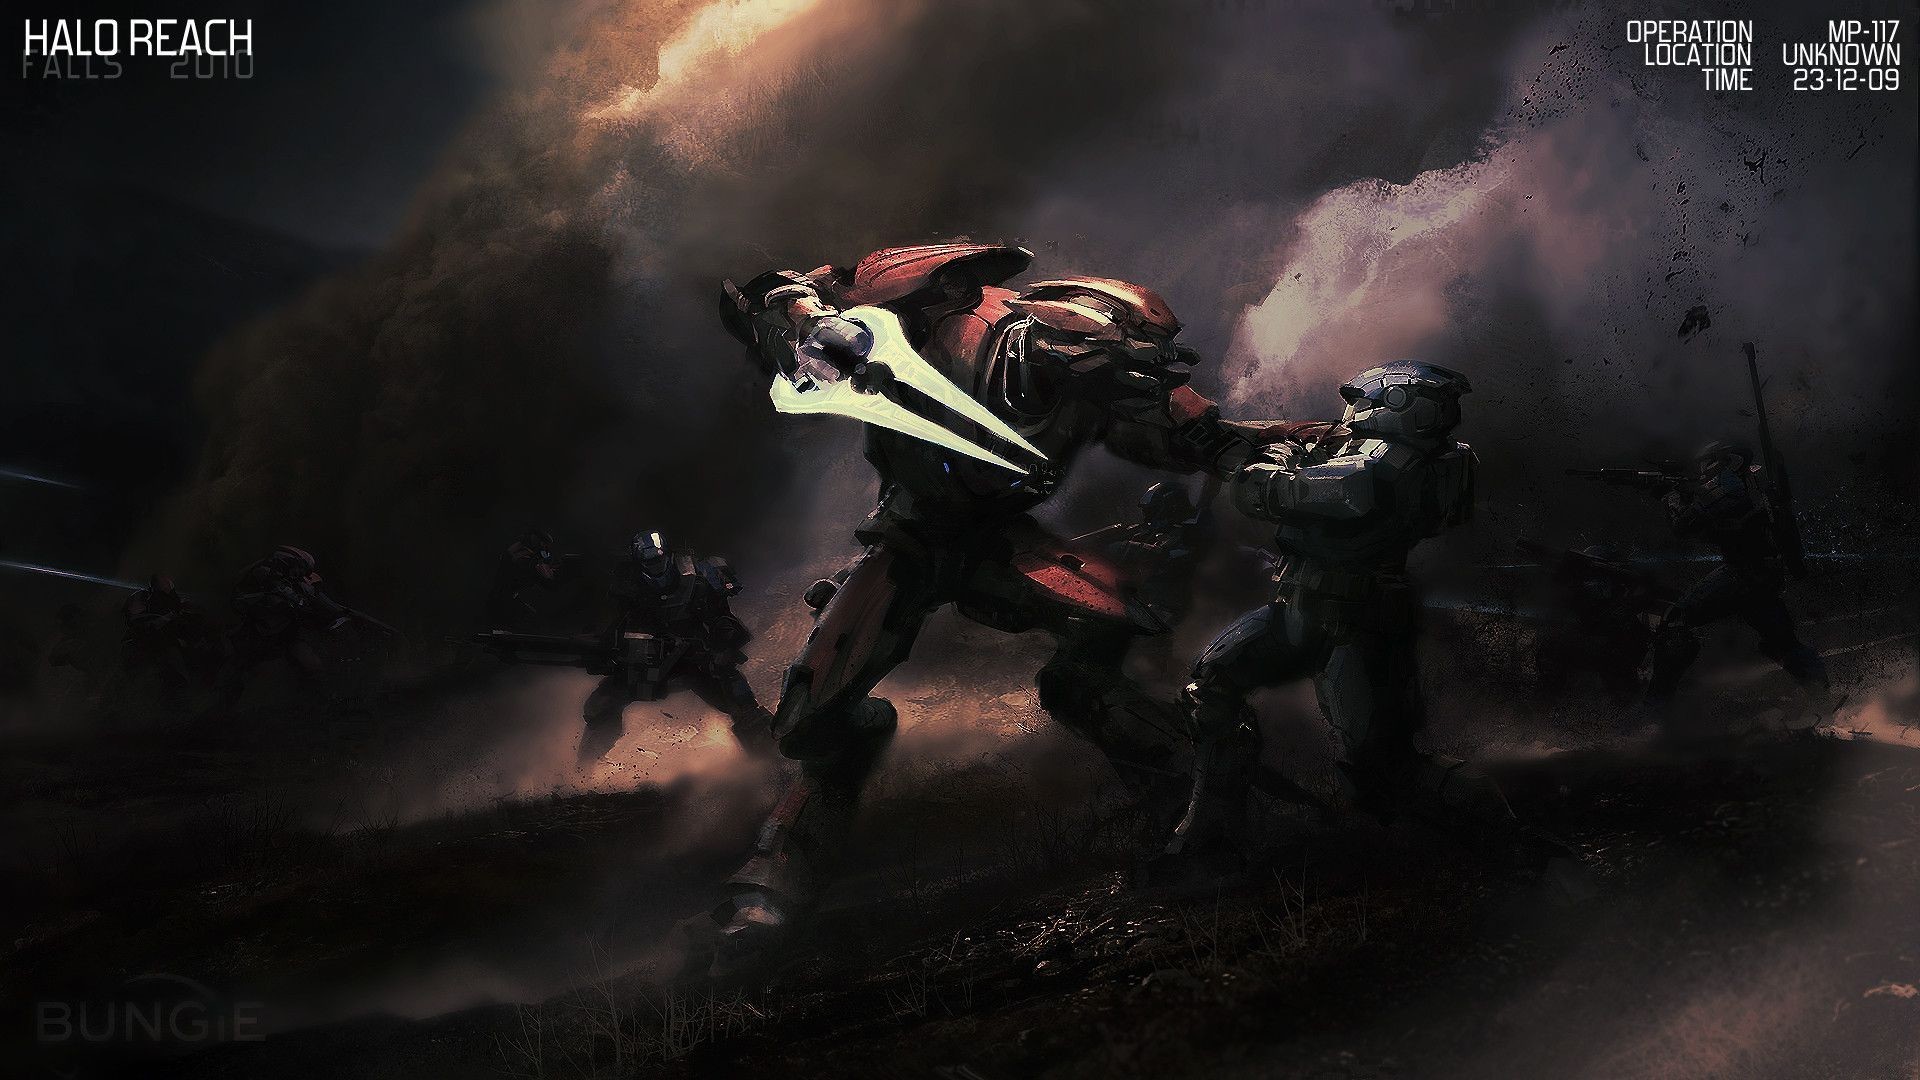 1920x1080 Halo Reach Backgrounds Hd Sick Awesome Halo Reach Wallpaper New .